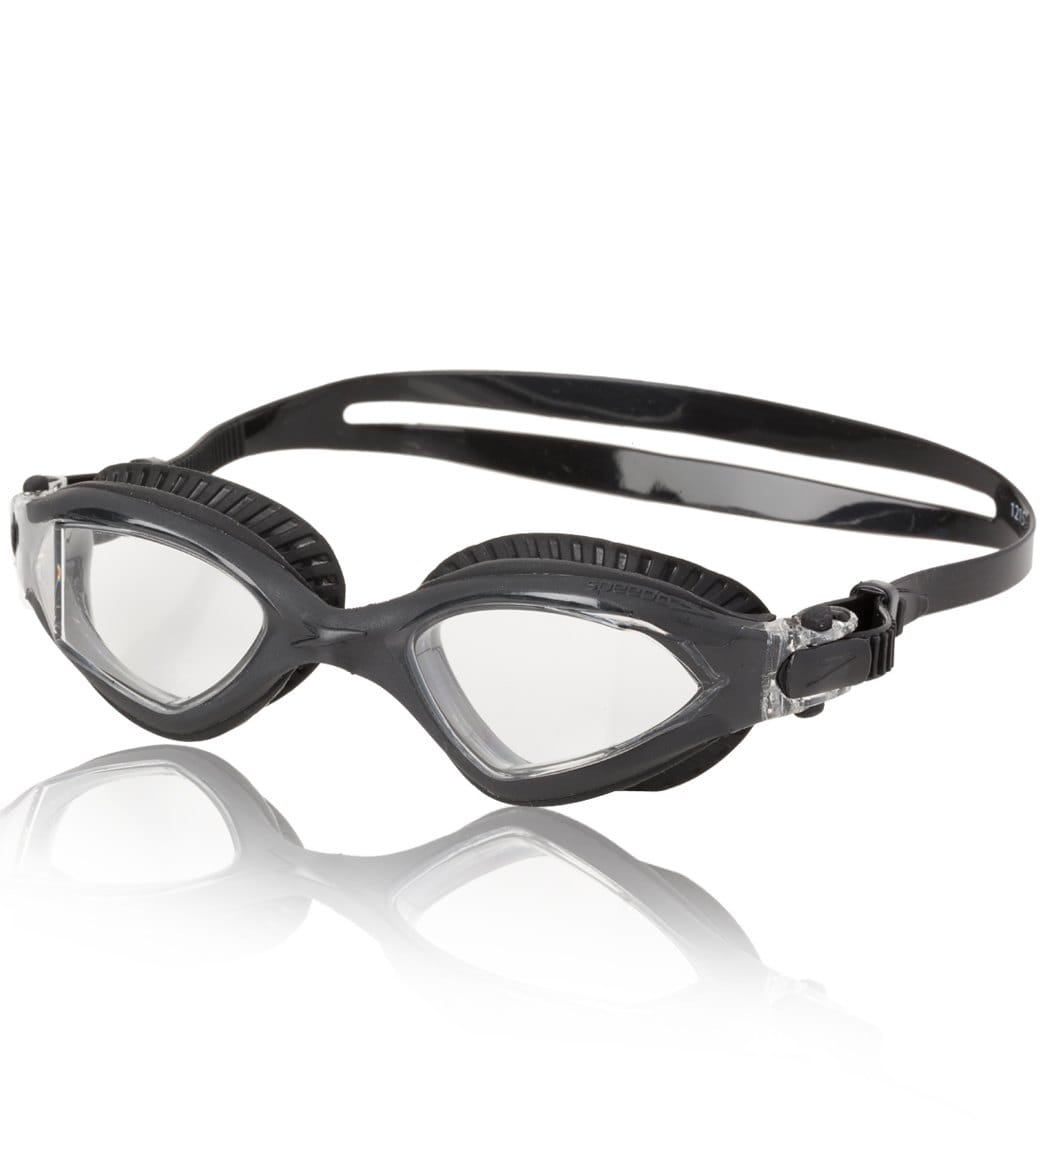 Speedo MDR 2.4 Goggle at SwimOutlet.com